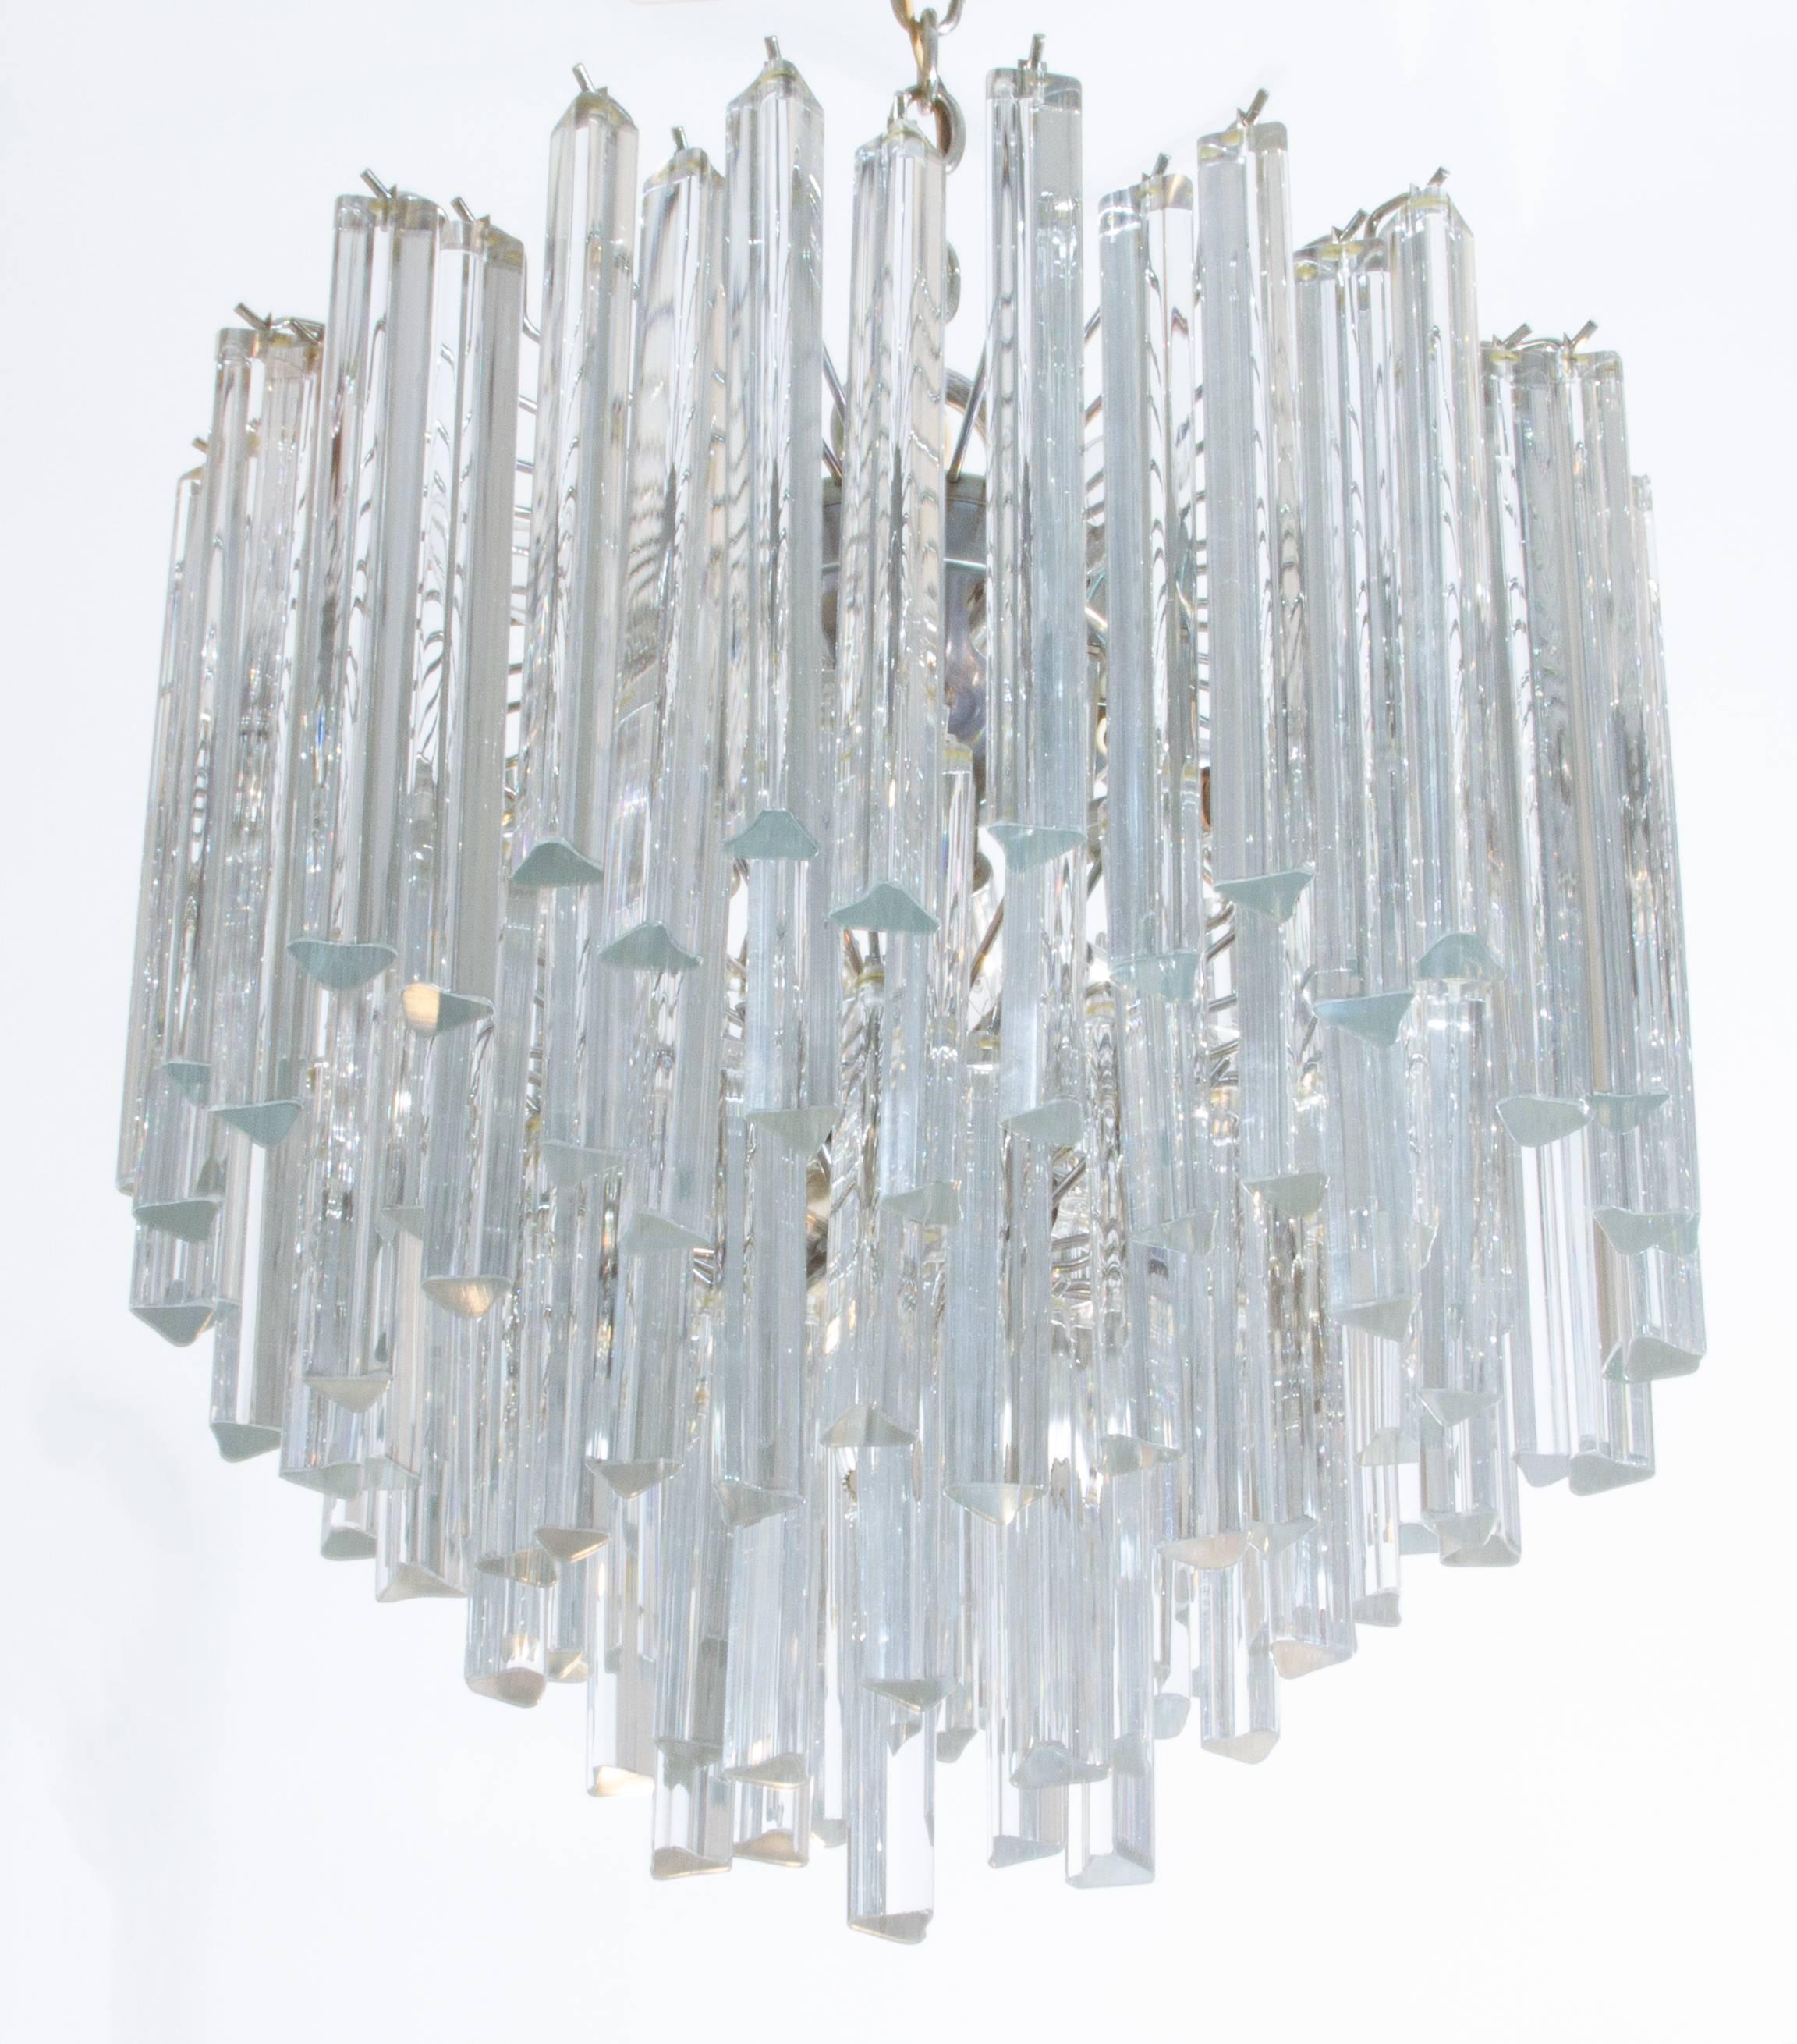 This is a very nice looking multi layered chandelier with a chrome armature.